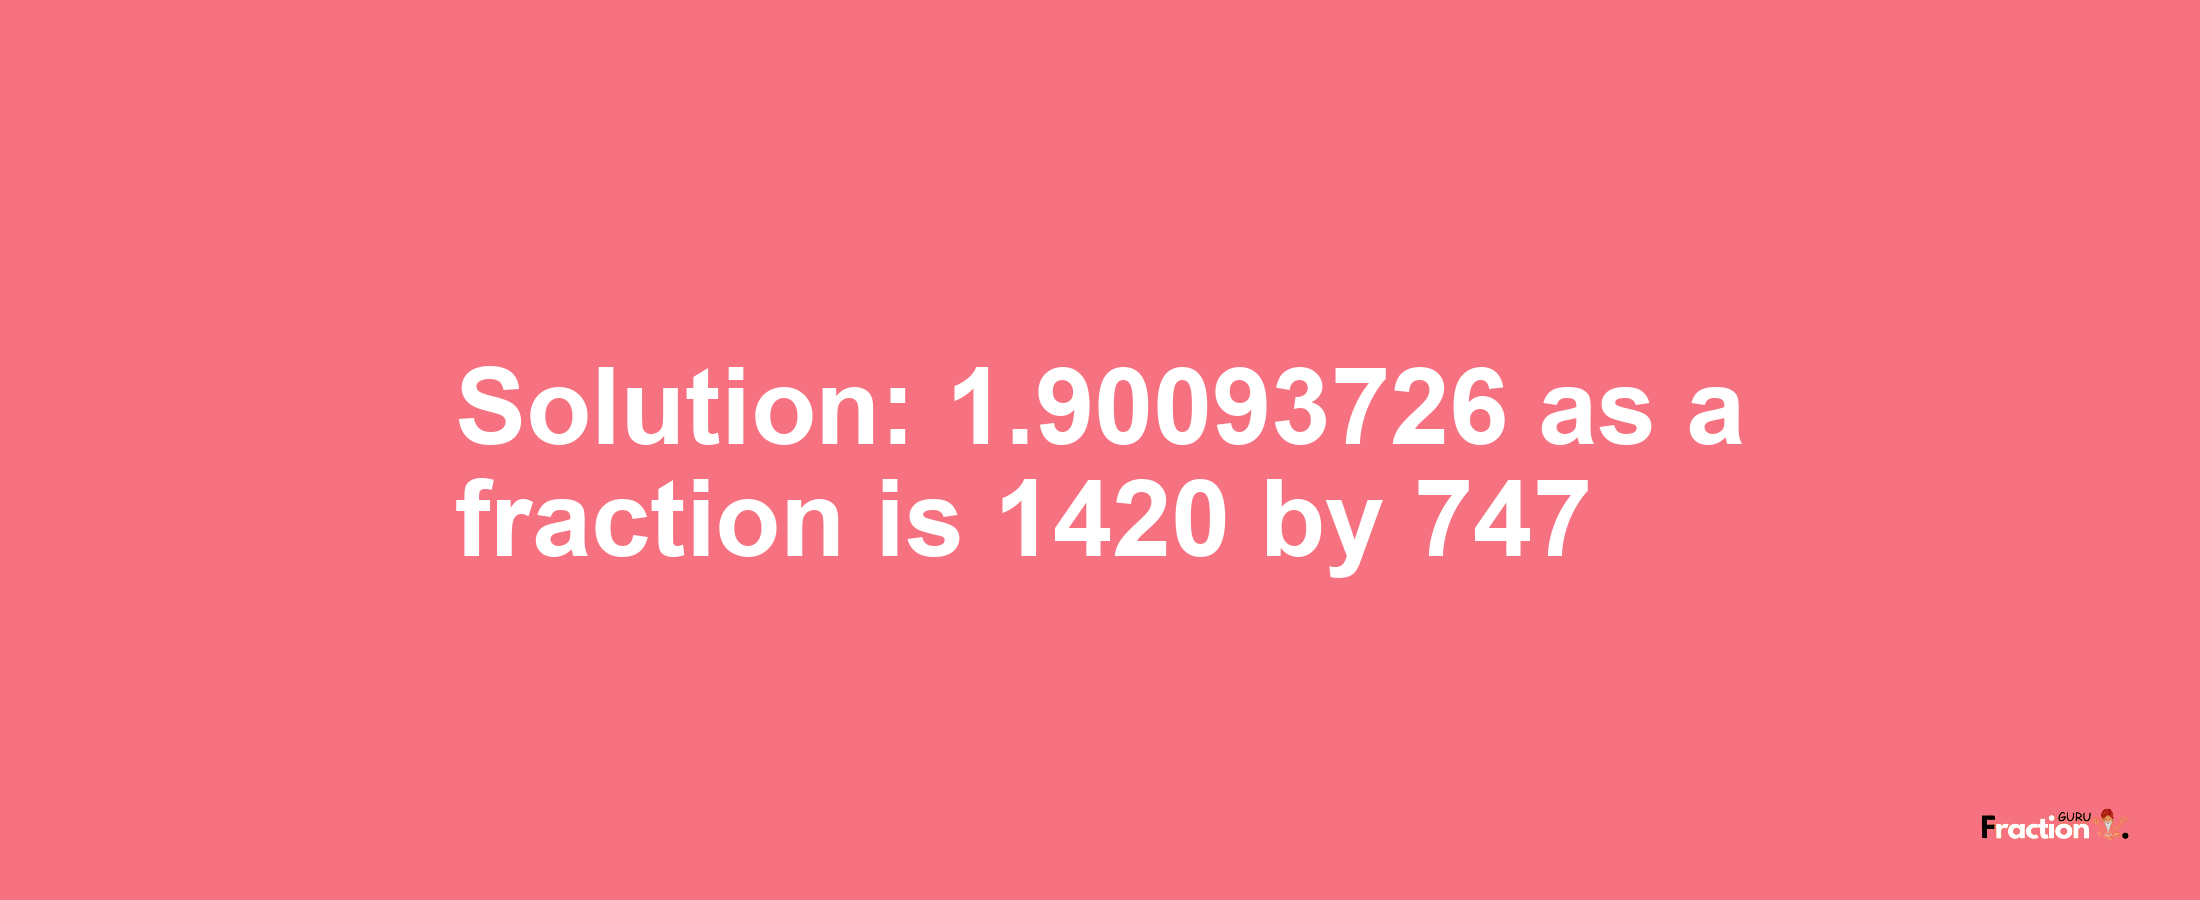 Solution:1.90093726 as a fraction is 1420/747